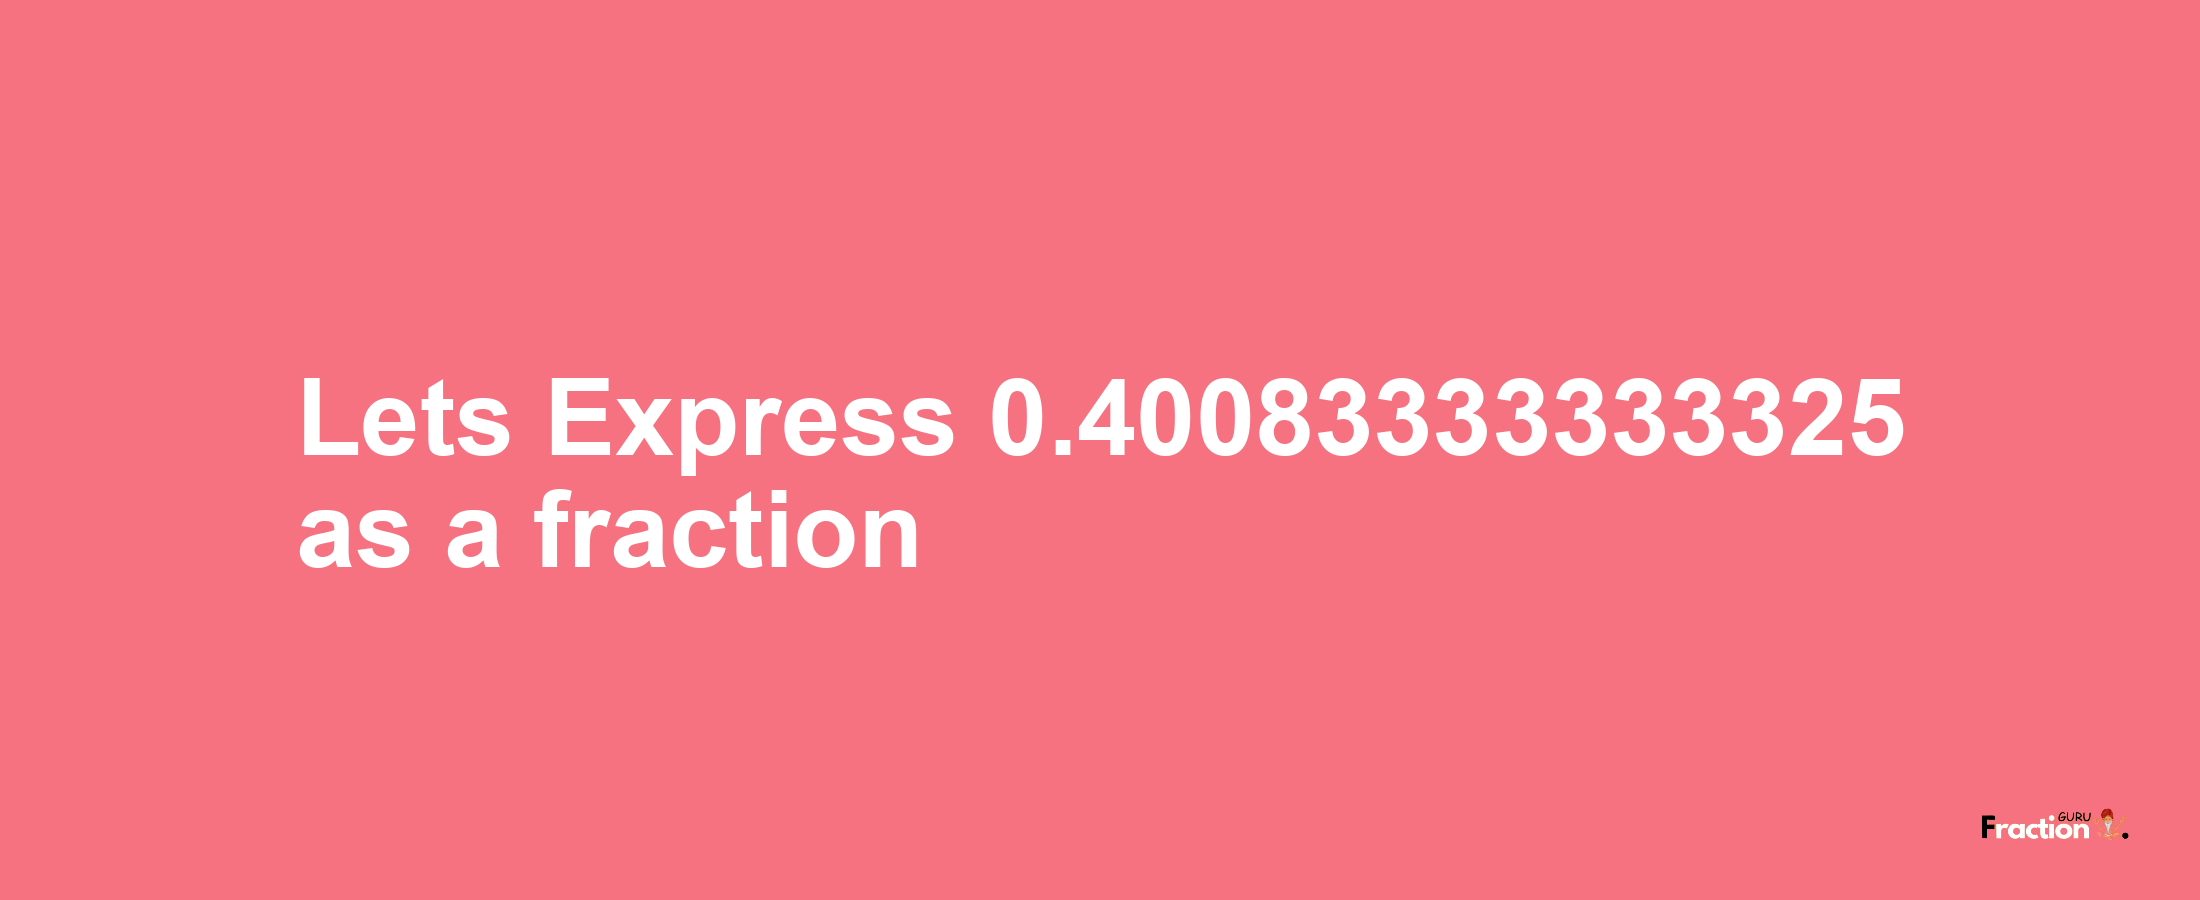 Lets Express 0.40083333333325 as afraction